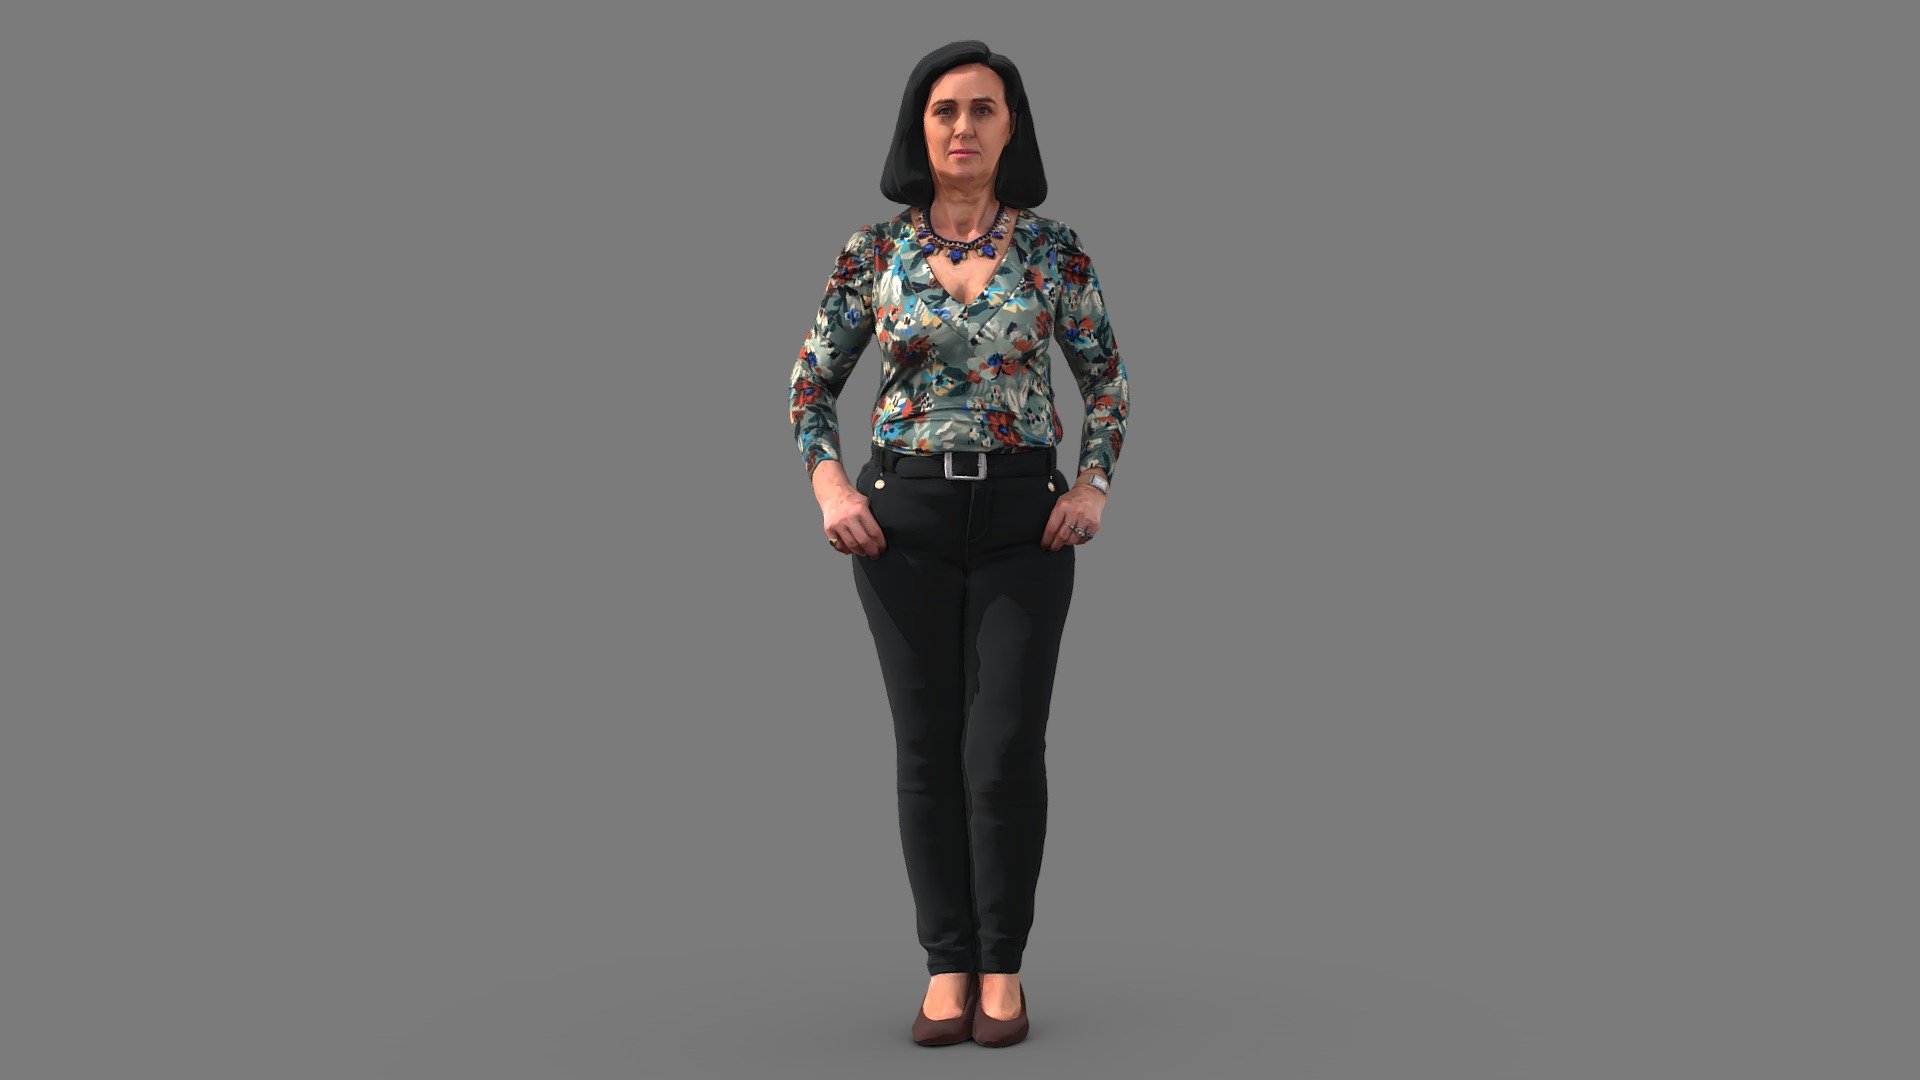 Today we present you a 3D digital model of a lady, a unique and exclusive piece that will make your designs stand out from all the others. With incredible precision in detail and texture, this 3D digital model will allow you to see the woman from different angles and customize her clothing and accessories to your liking.
Whether you are a fashion designer, a digital artist or an advertising creative, this 3D digital model will allow you to take your ideas to a new level of realism and quality.
Can be printed in any method you want, can also be used for 3D animation 3d model